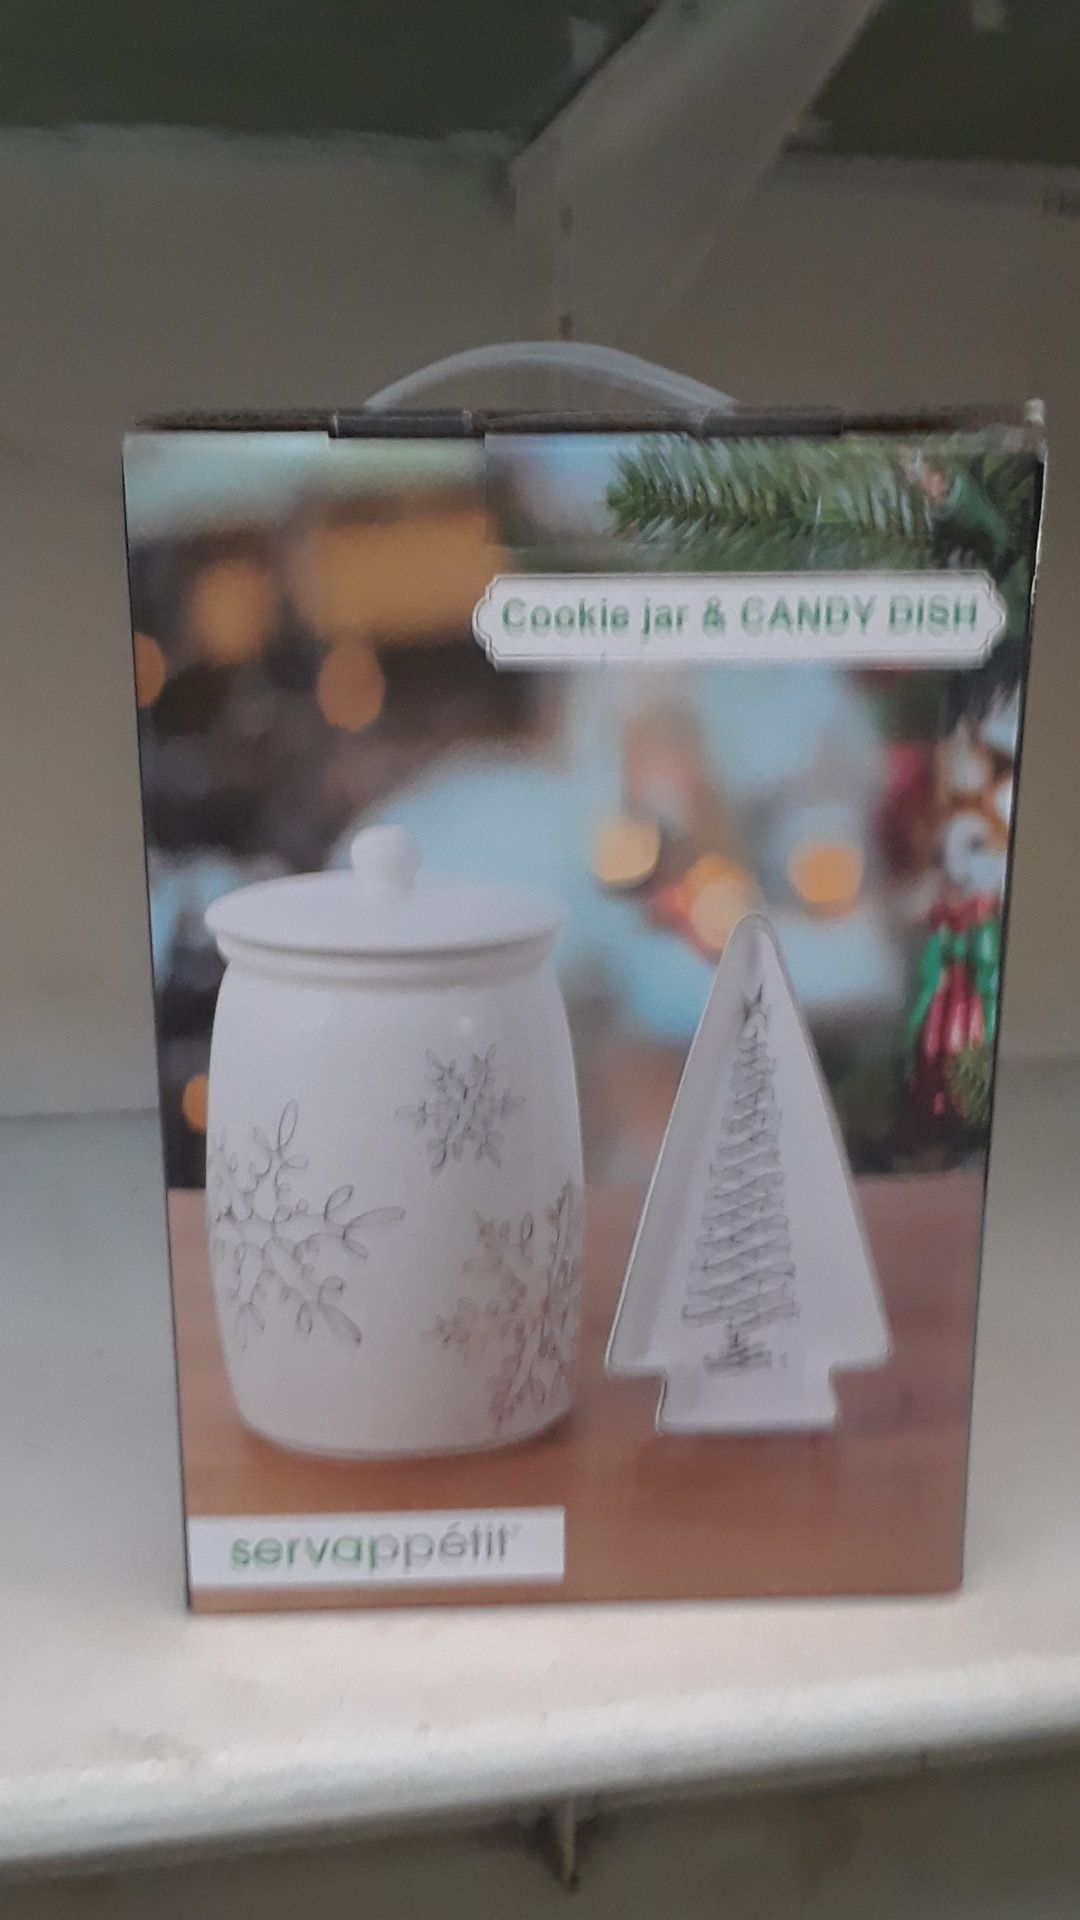 Cookie jar and candy dish ceramic brand new